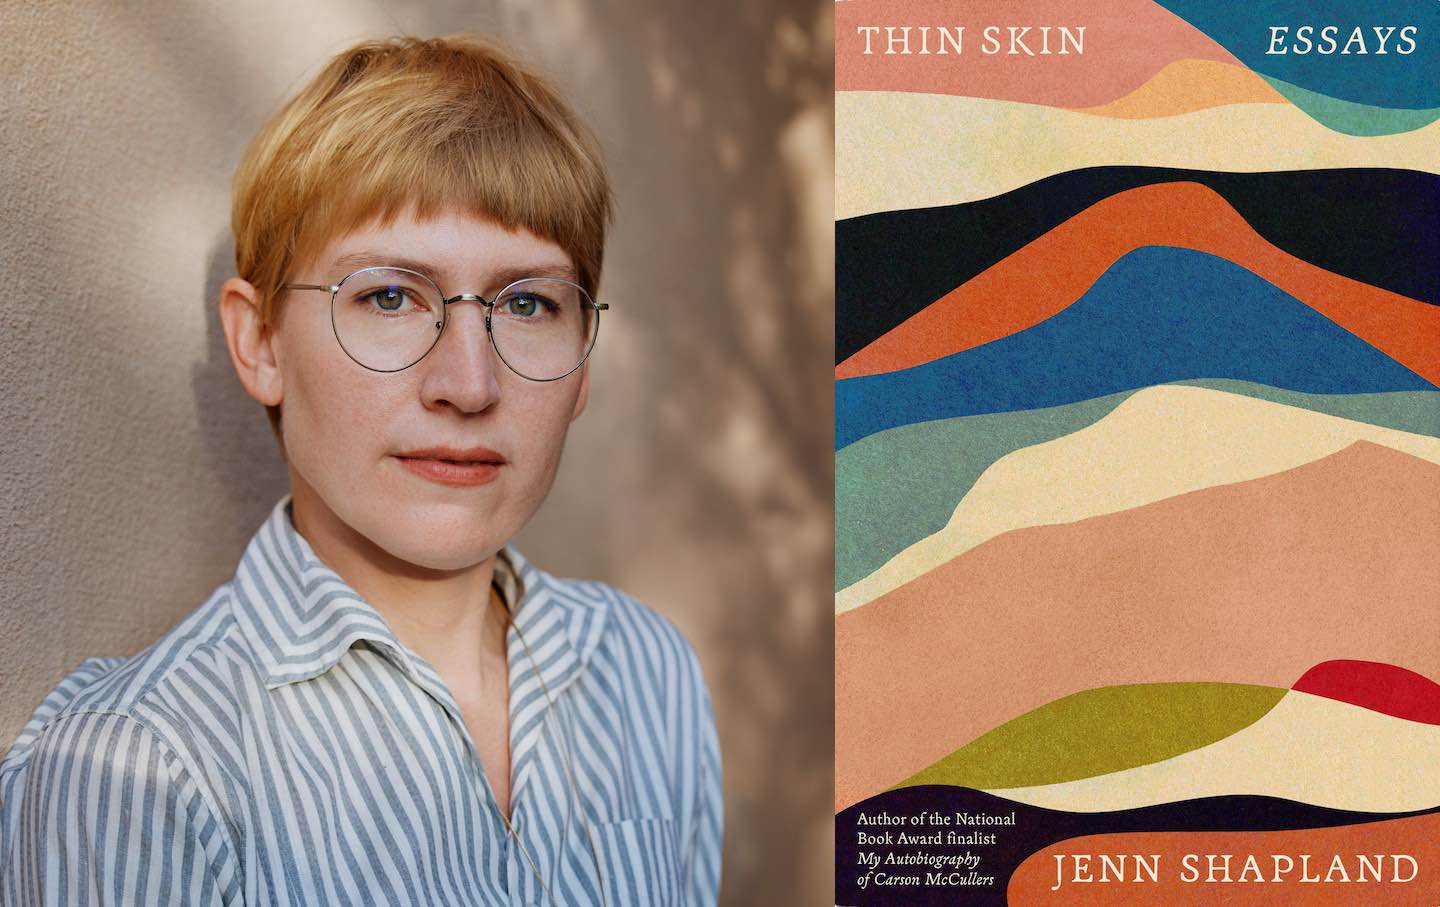 Jenn Shapland's new collection of essays, Thin Skin (Pantheon), probes the capacity of essay as a form to examine and question the lines we draw between ourselves and others, ourselves and the non-human world, and the past we’ve wrought with the present in which we live.